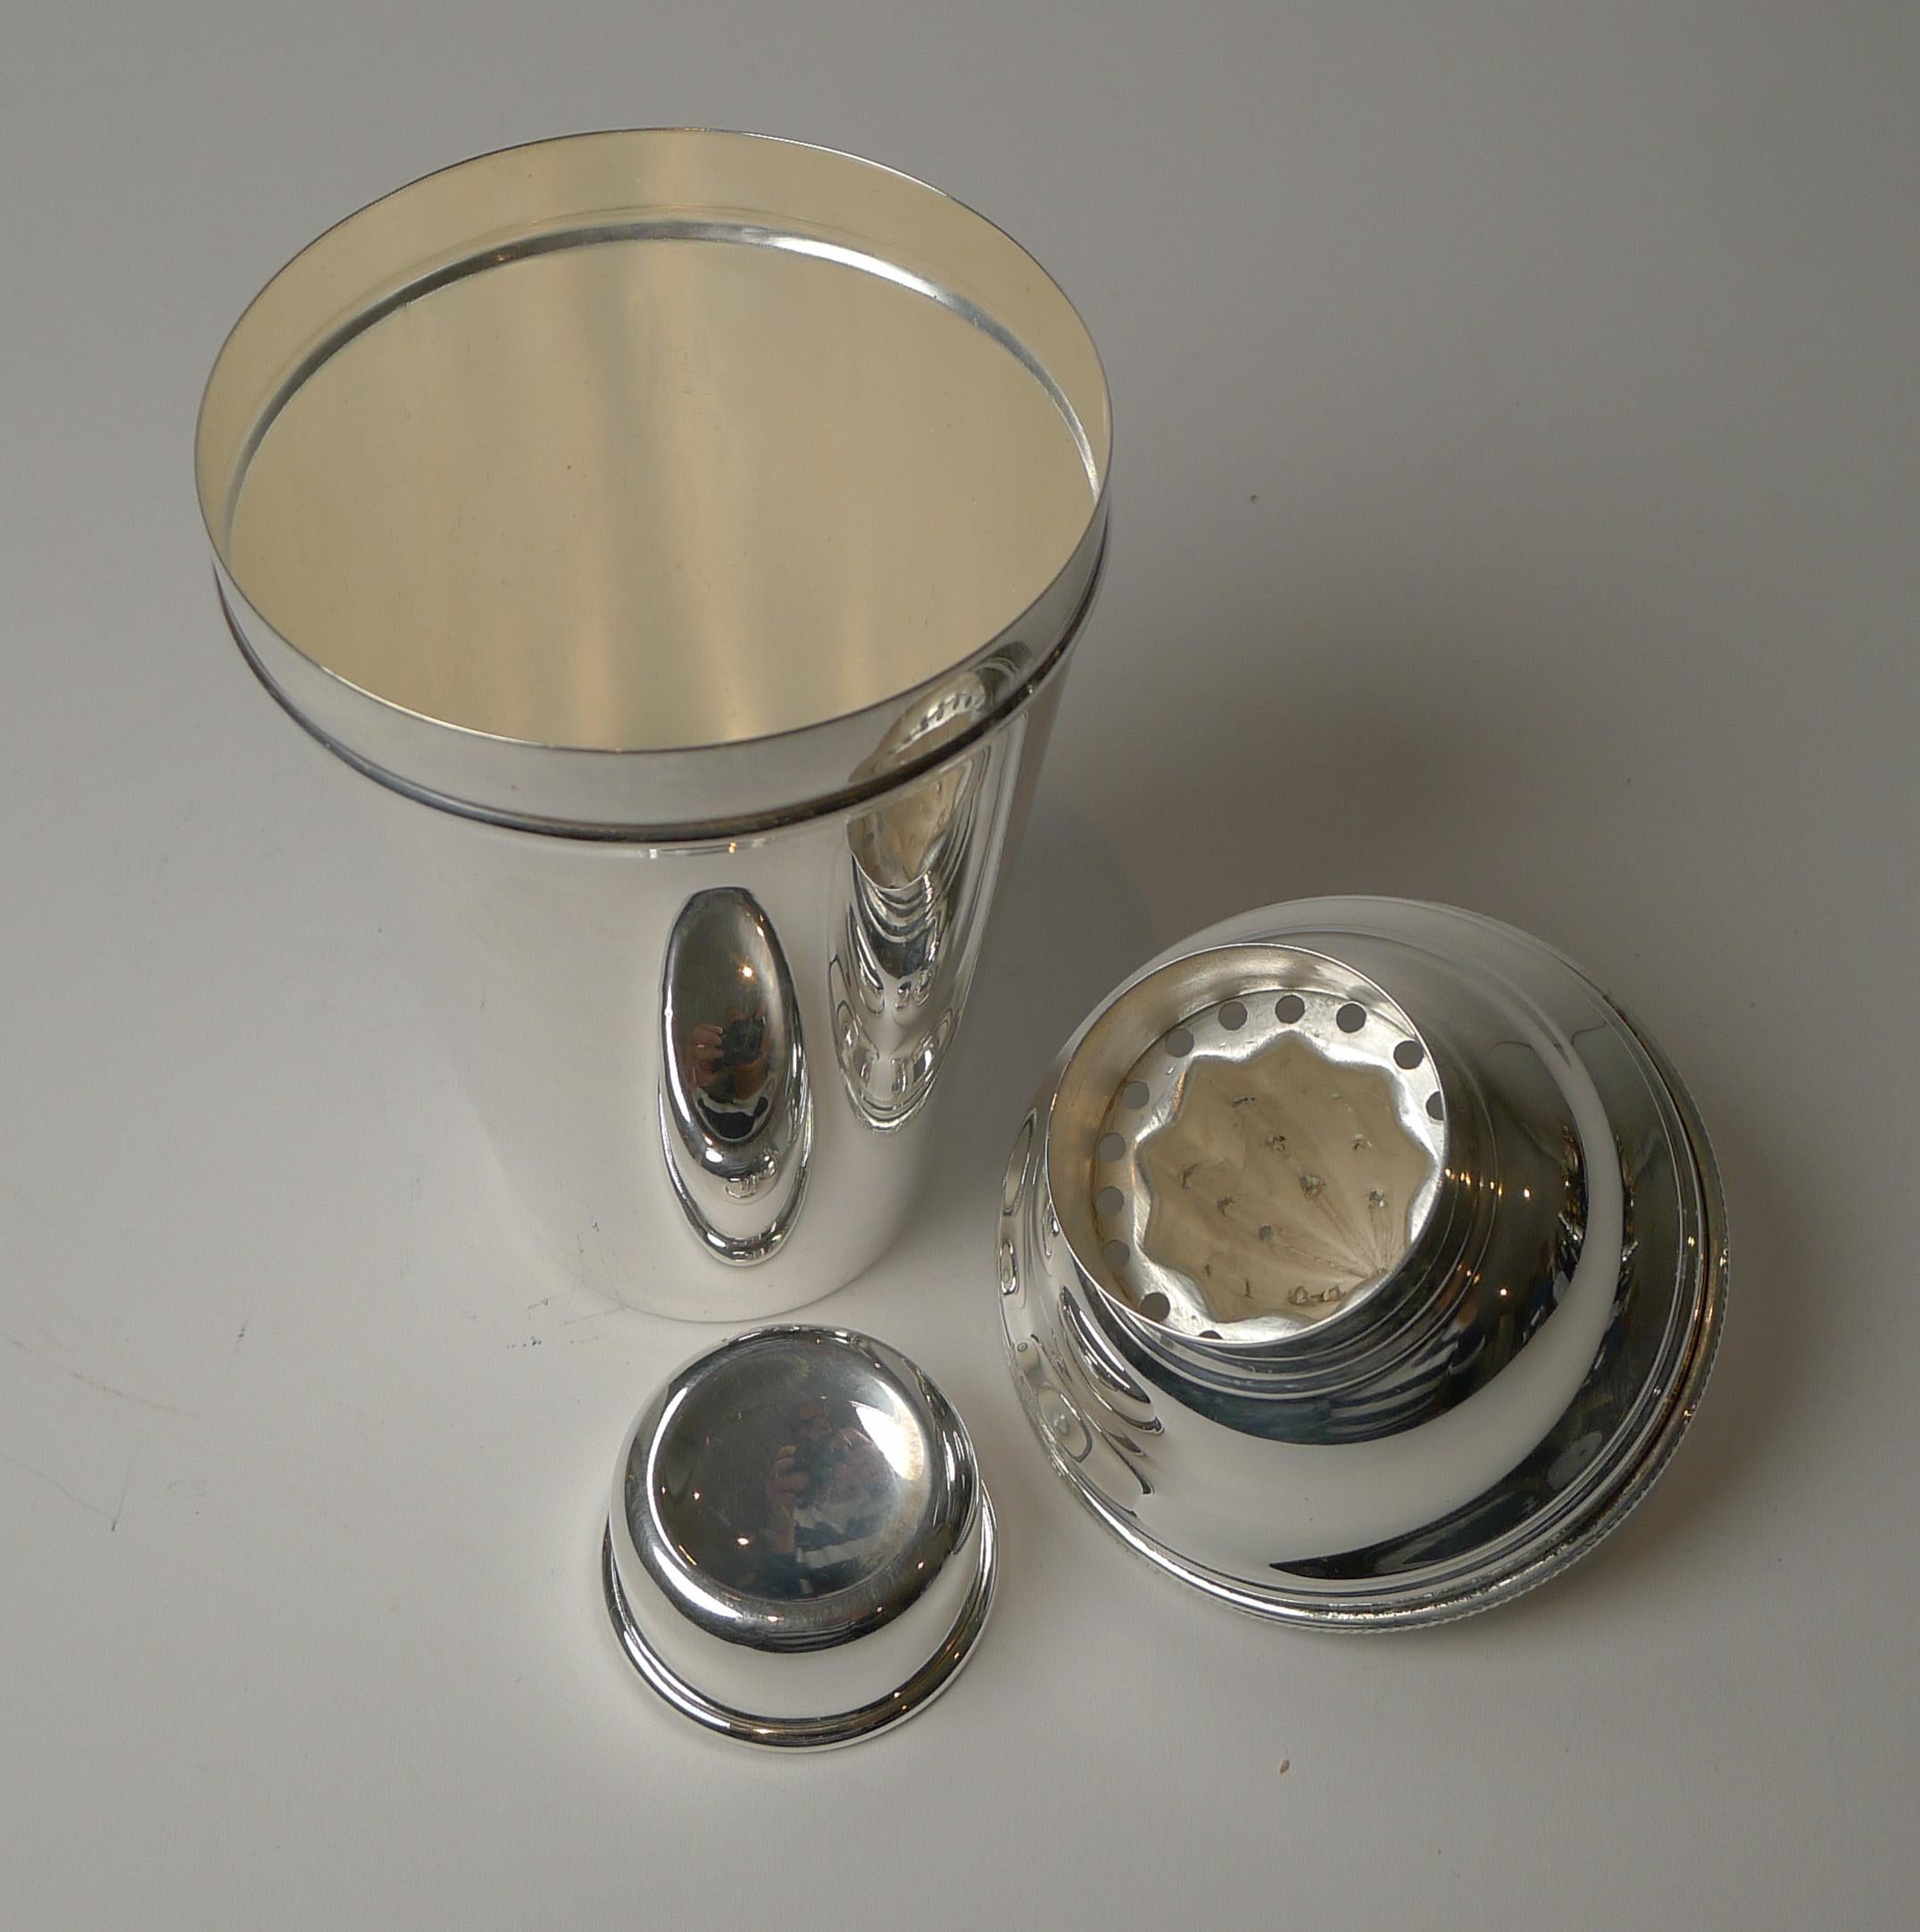 Art Deco Harrods One Pint Cocktail Shaker With Integral Lemon Squeezer For Sale